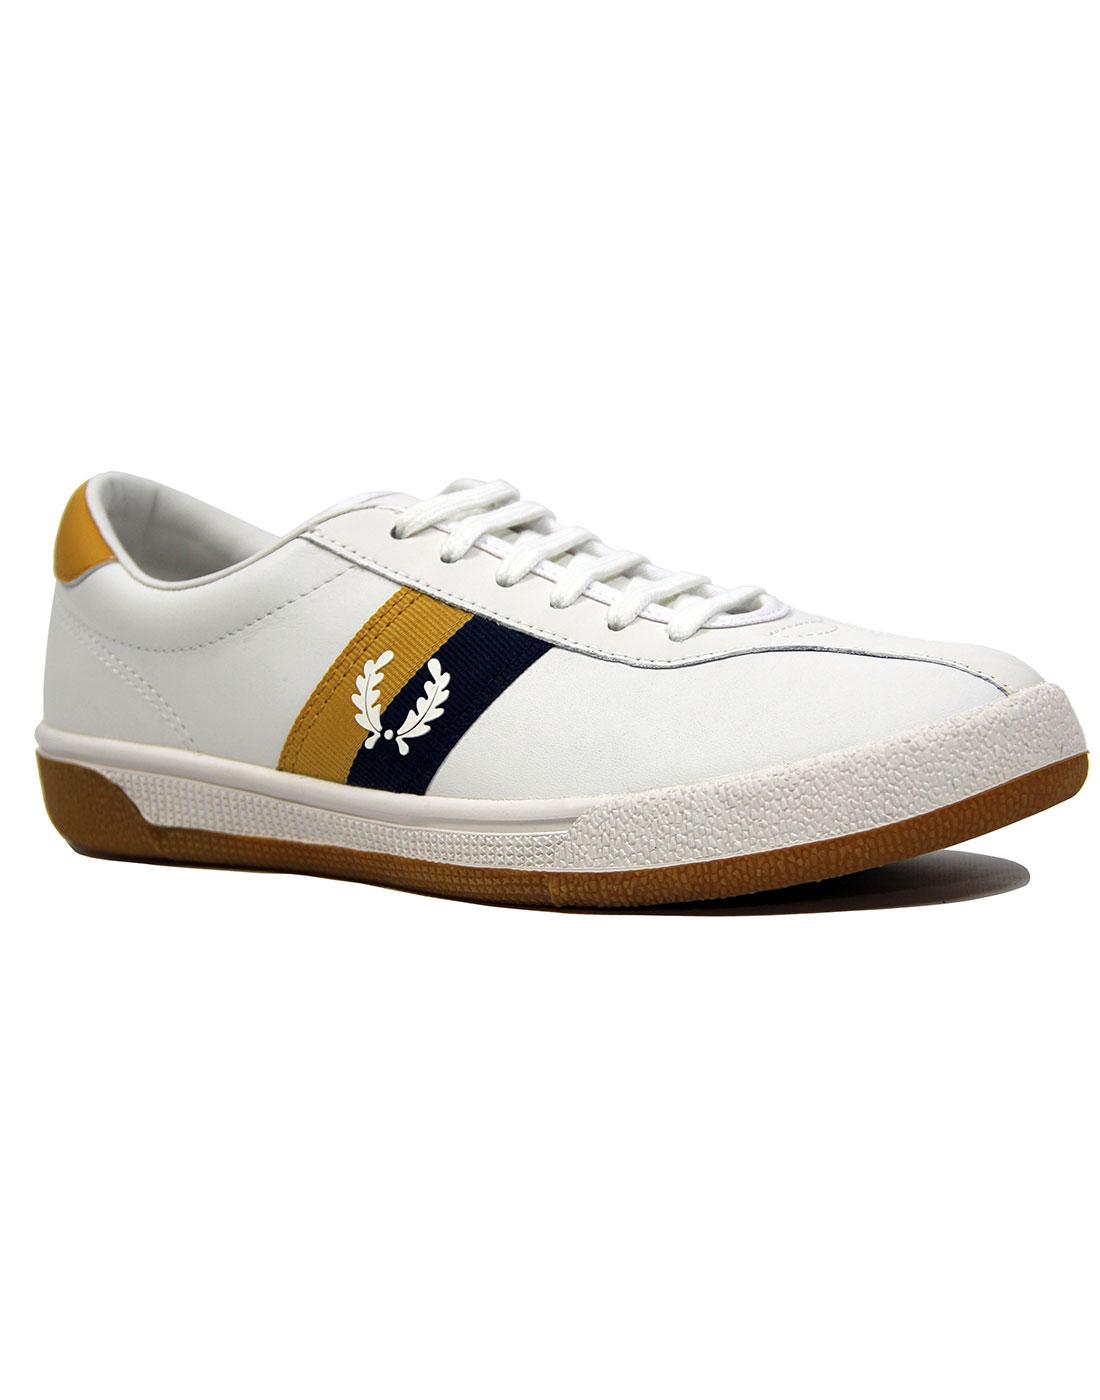 FRED PERRY B103 Retro 70's Tennis Trainers SW